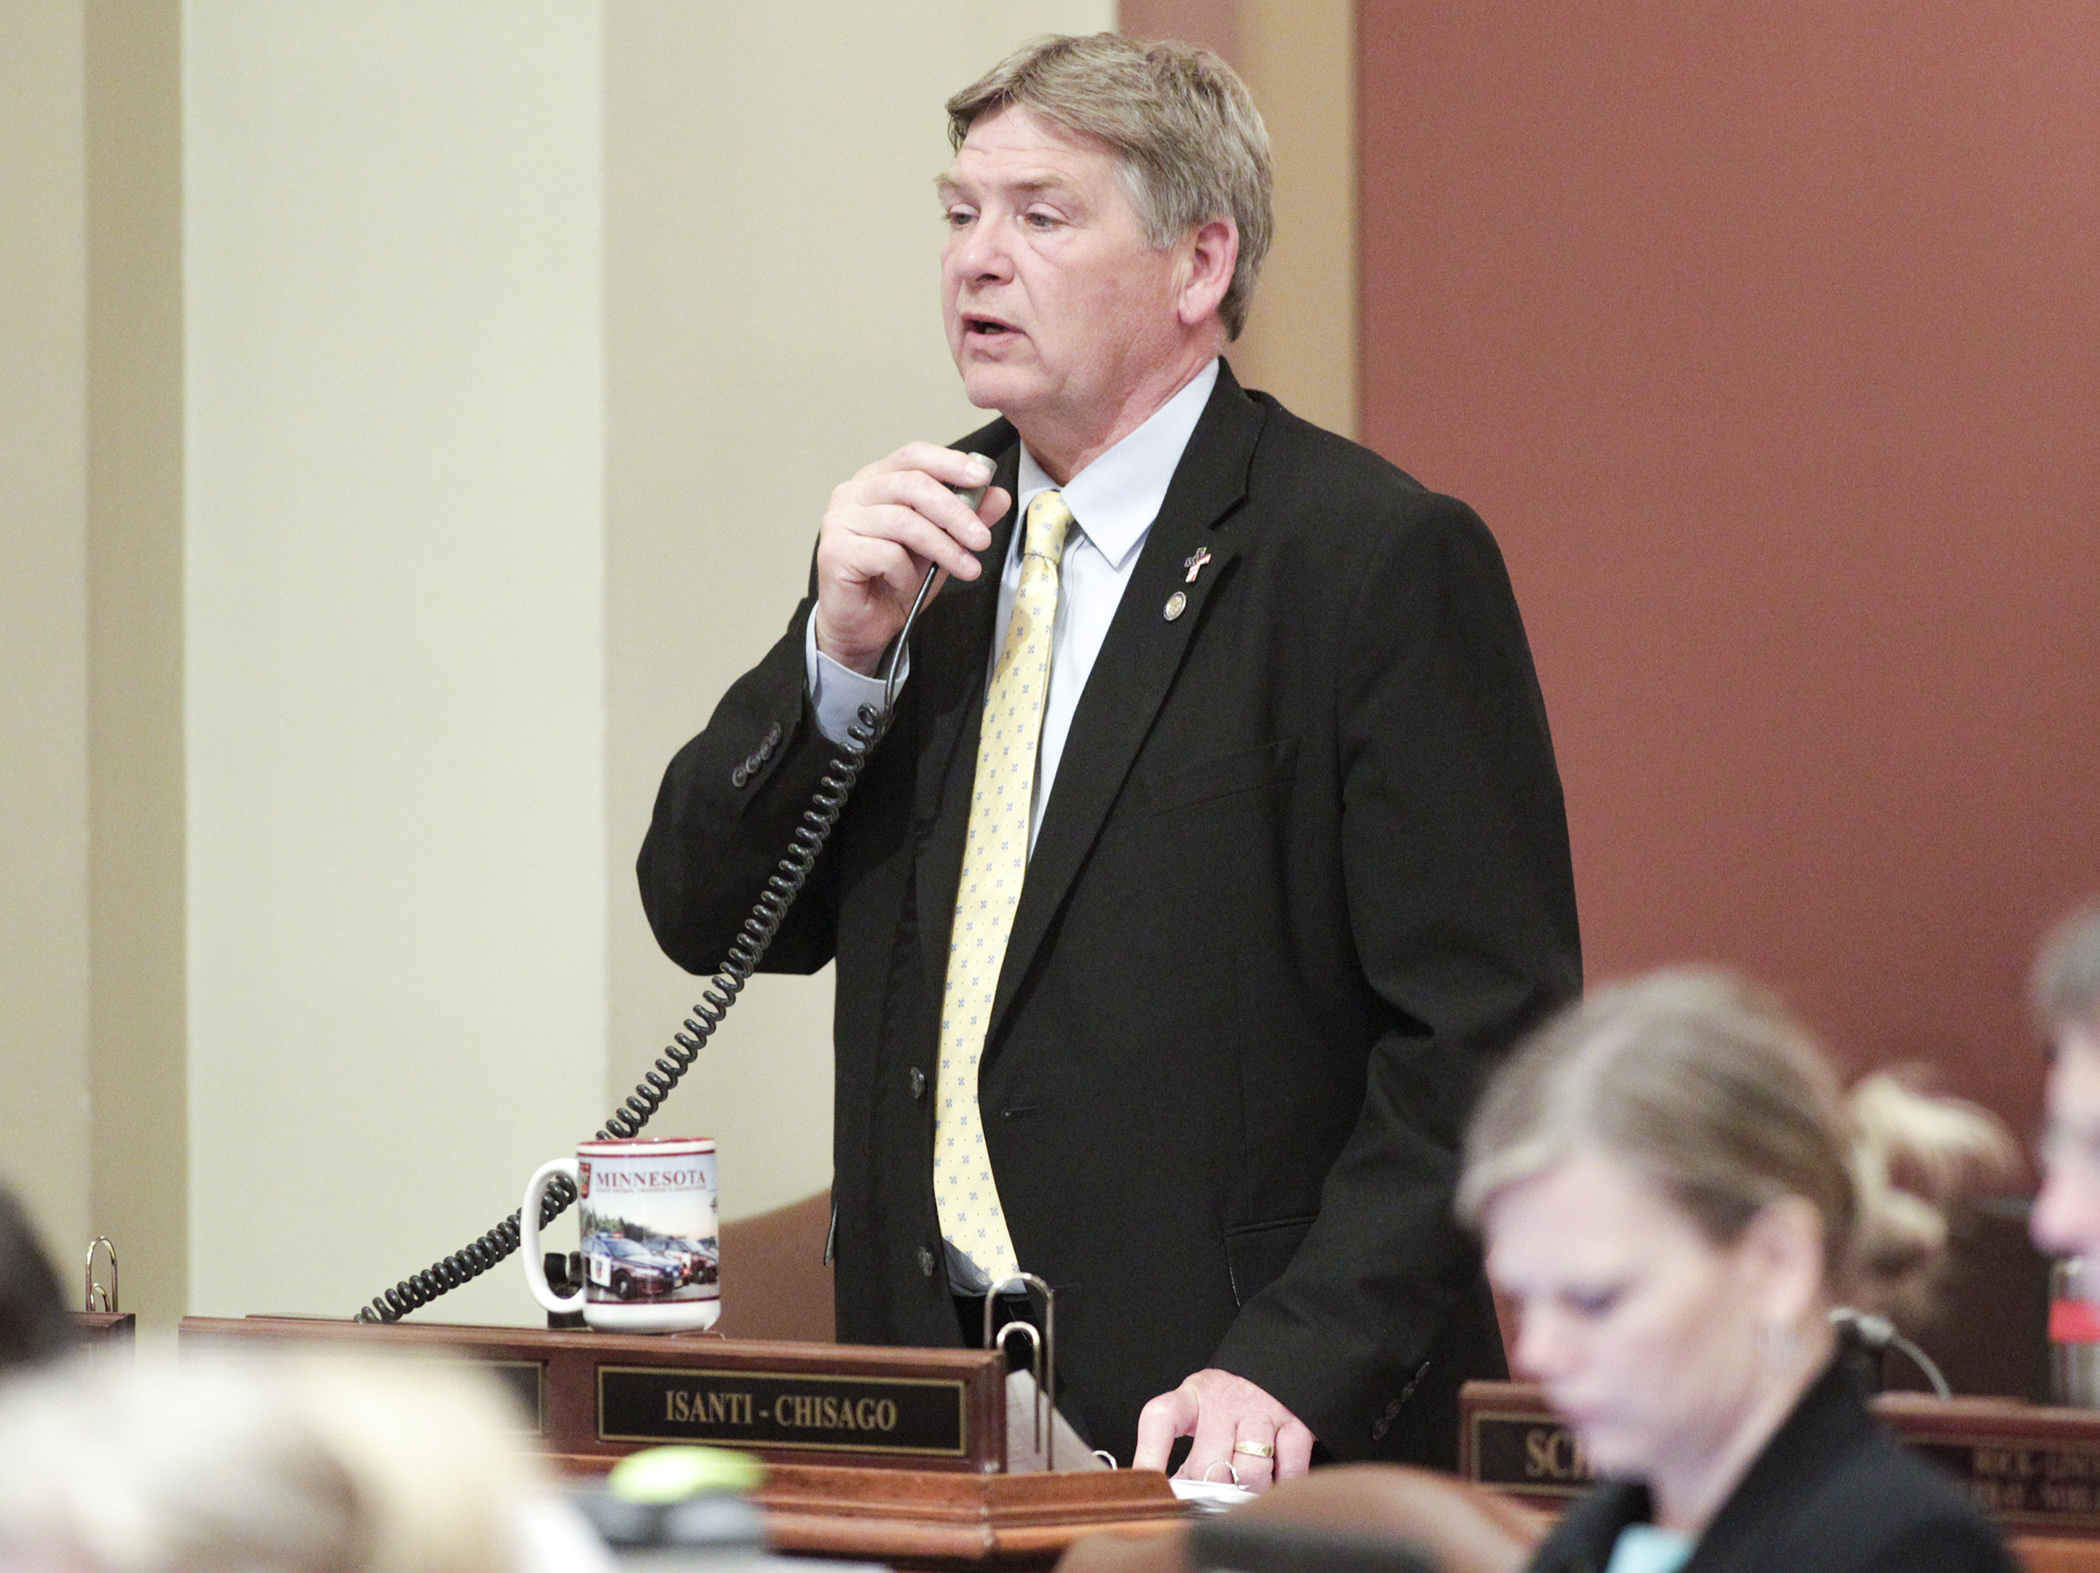 Rep. Brian Johnson describes HF2856, the omnibus public safety and security finance bill, before members begin debating the bill May 1. The bill was passed 92-35. Photo by Paul Battaglia